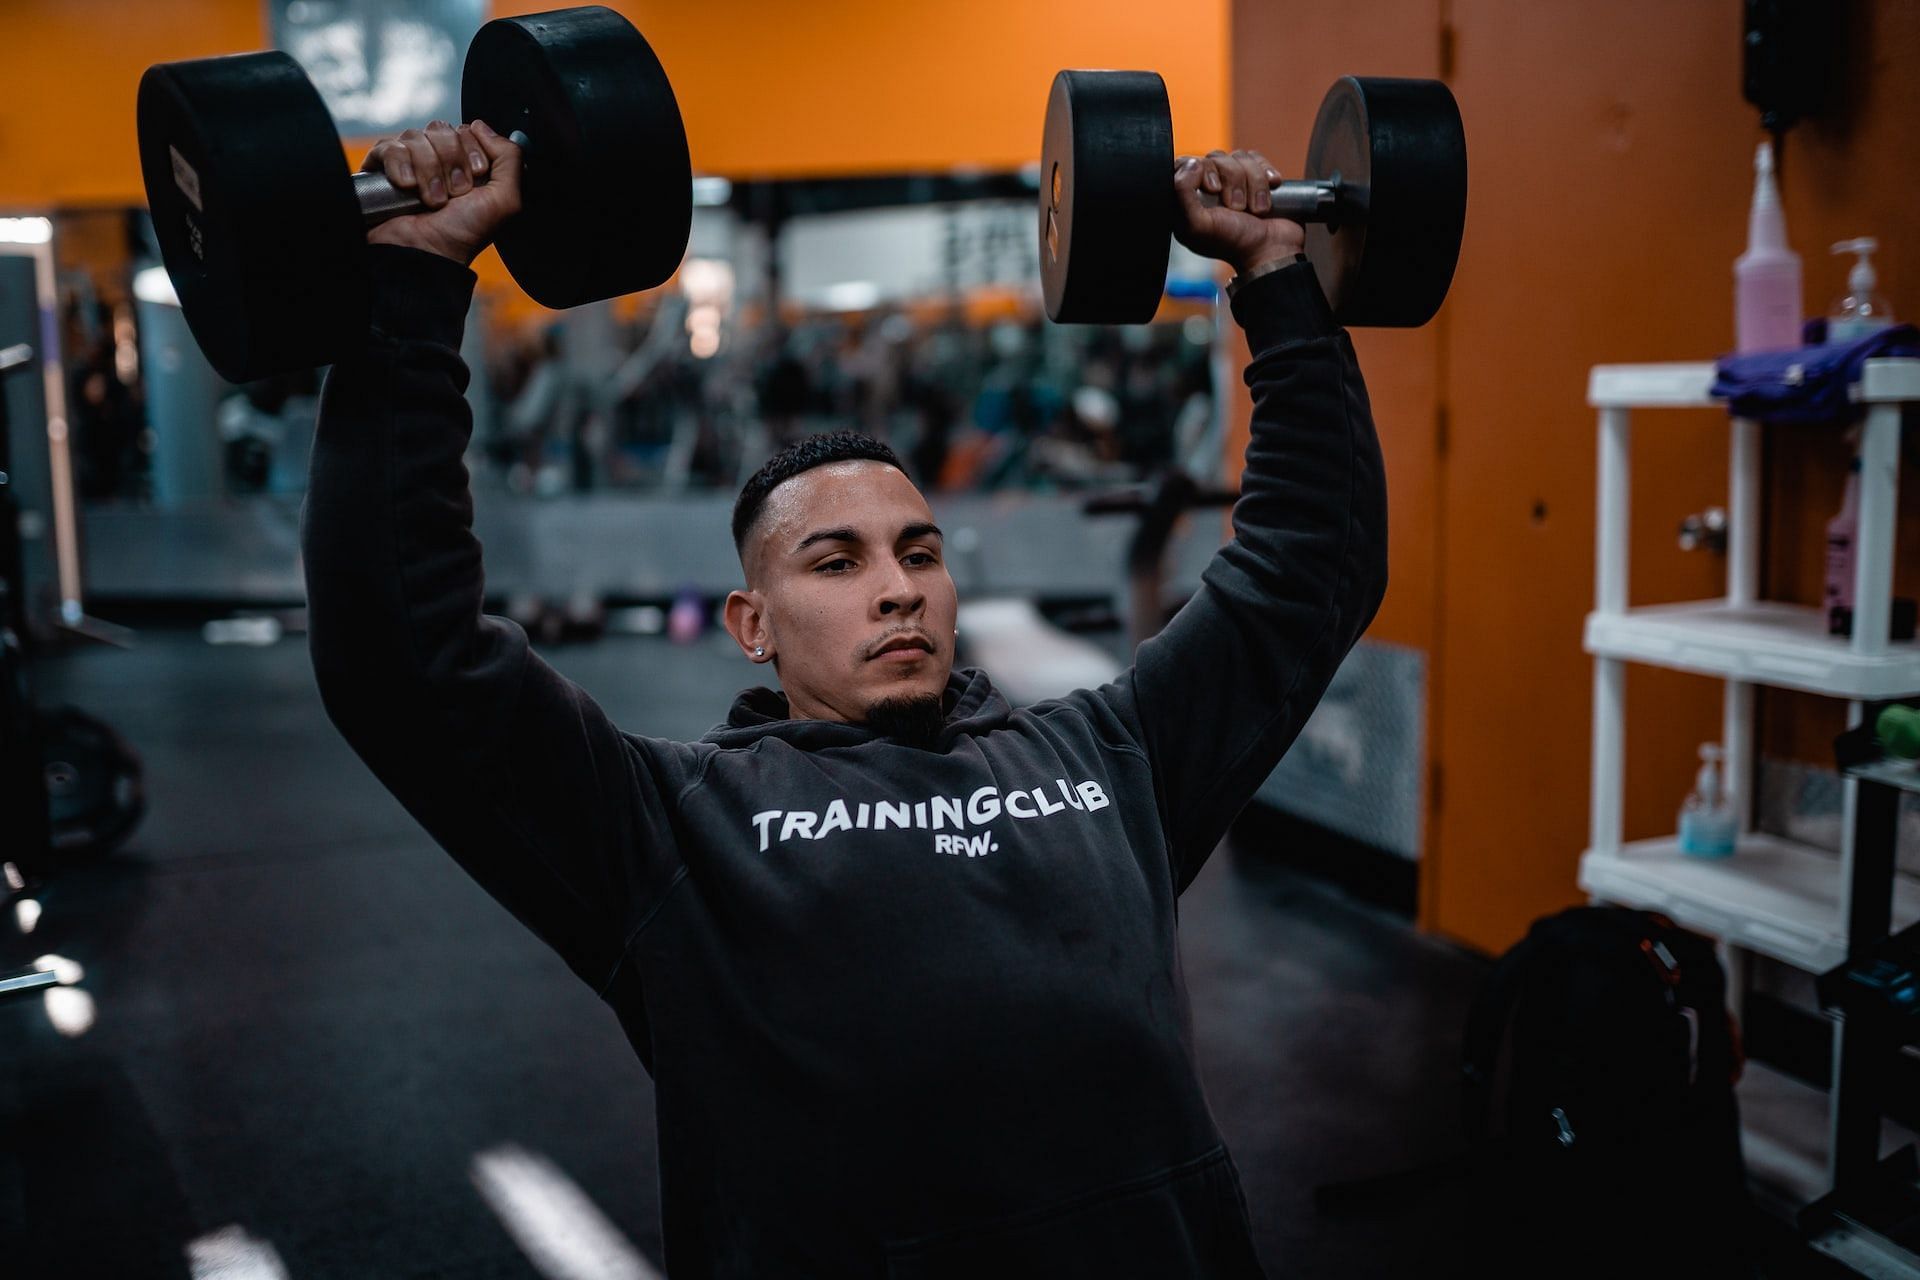 Guide to best bodybuilding exercises for men. (Photo by Ryan Hoffman on Unsplash)